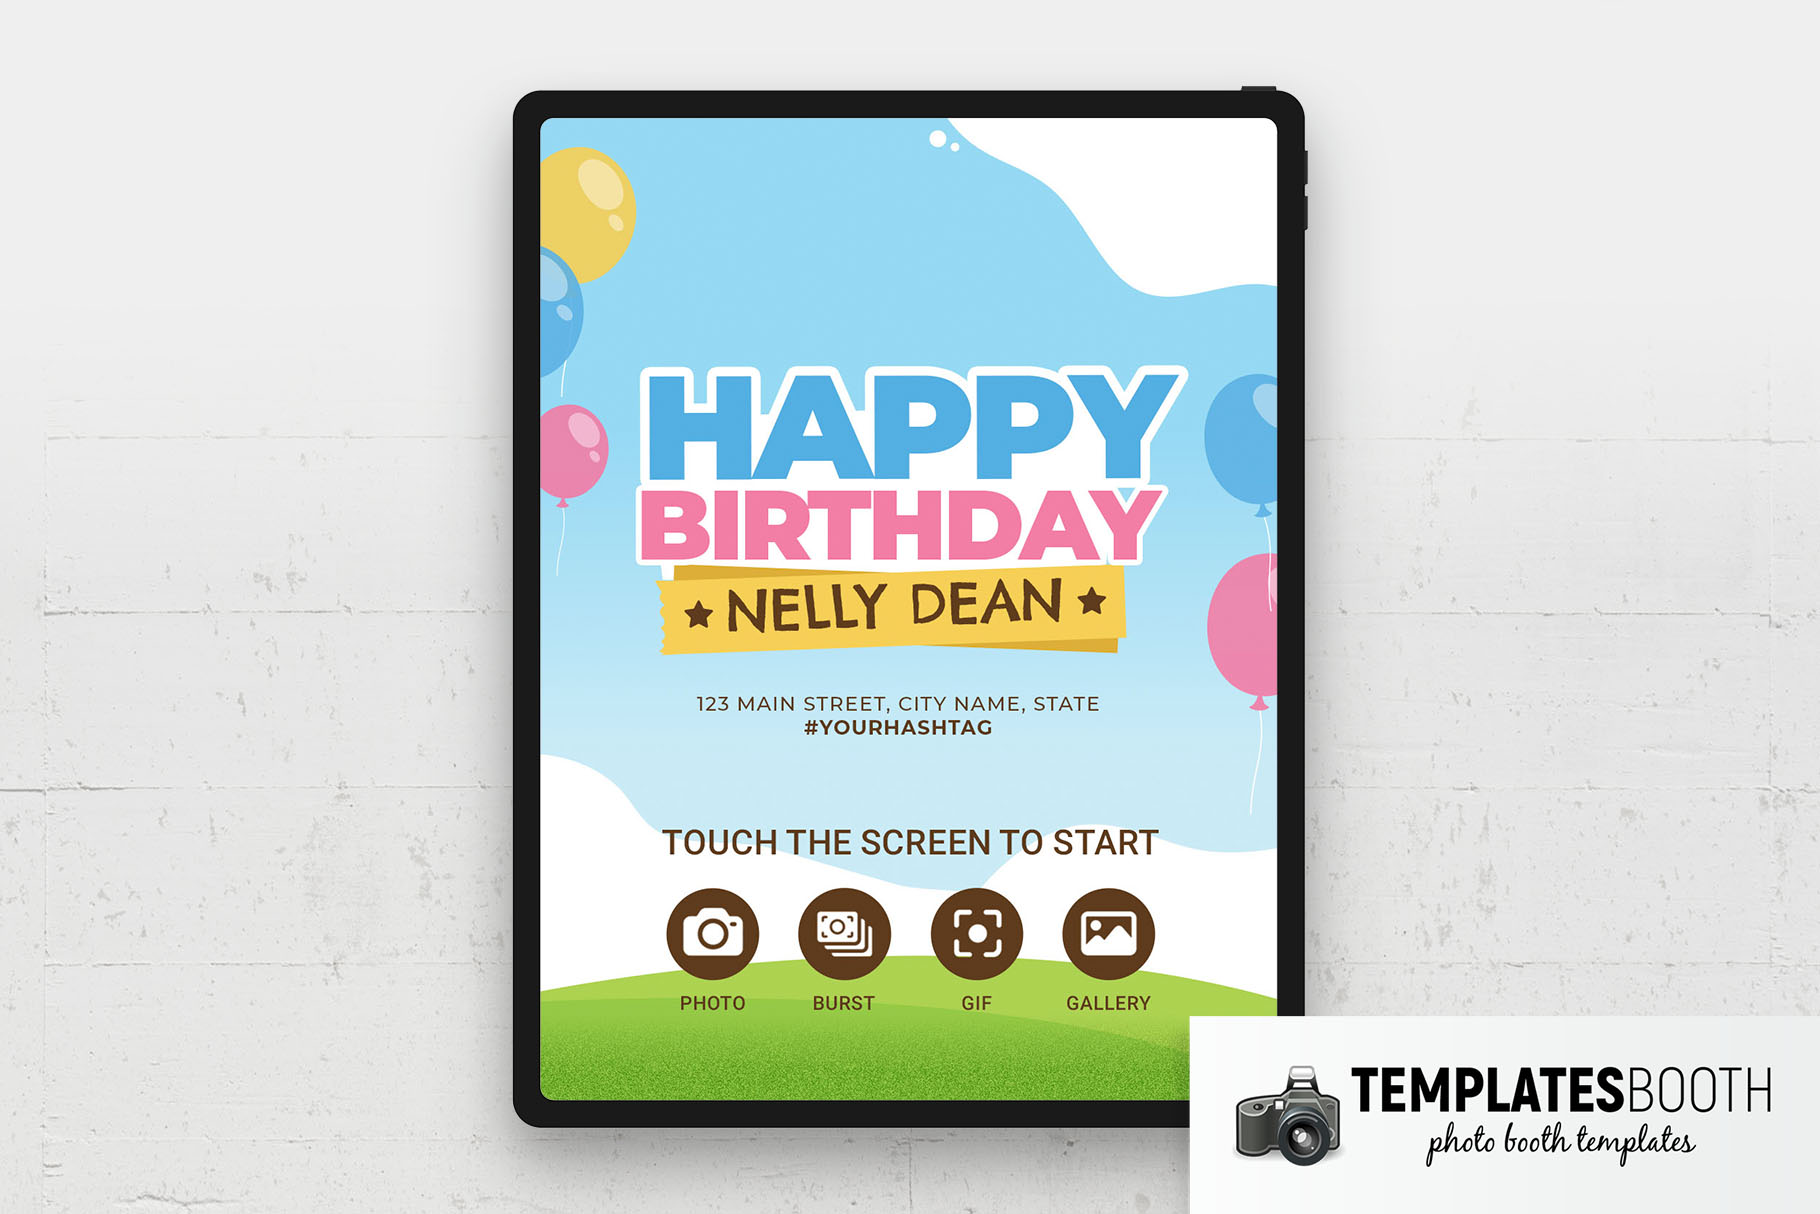 Happy Birthday Photo Booth Welcome Screen